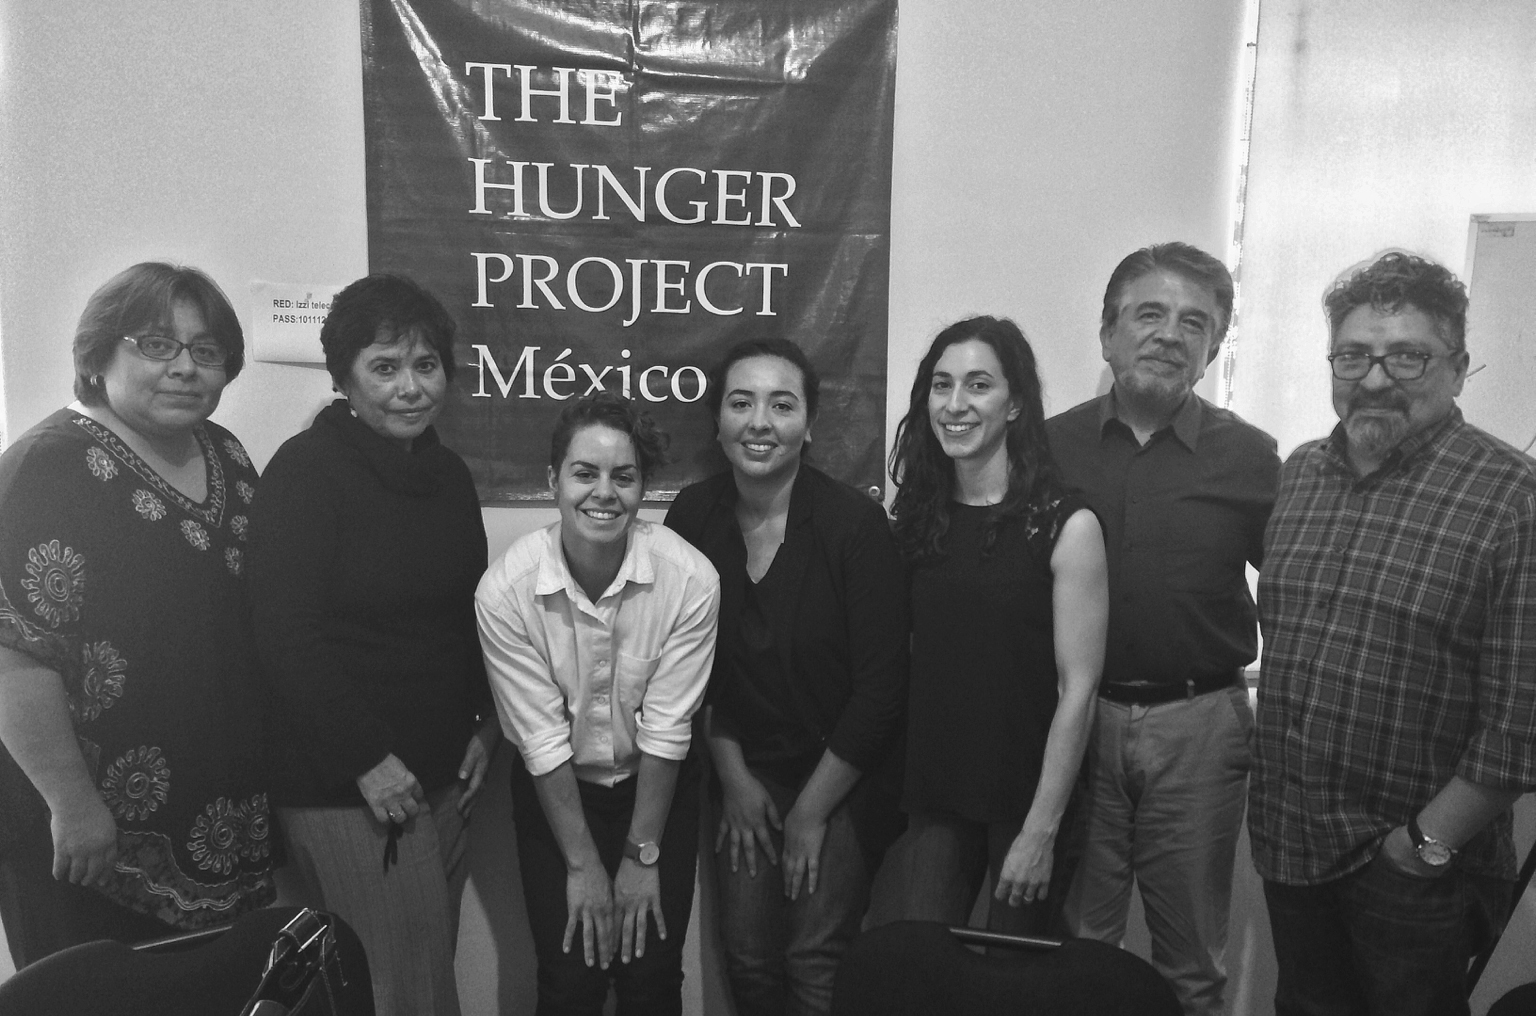 Global Food Initiative Scholar Tara Benesch and McNair Scholar Ana Ibarra meet with advocates from the Nutritional Health Alliance and El Poder del Consumidor in Mexico.